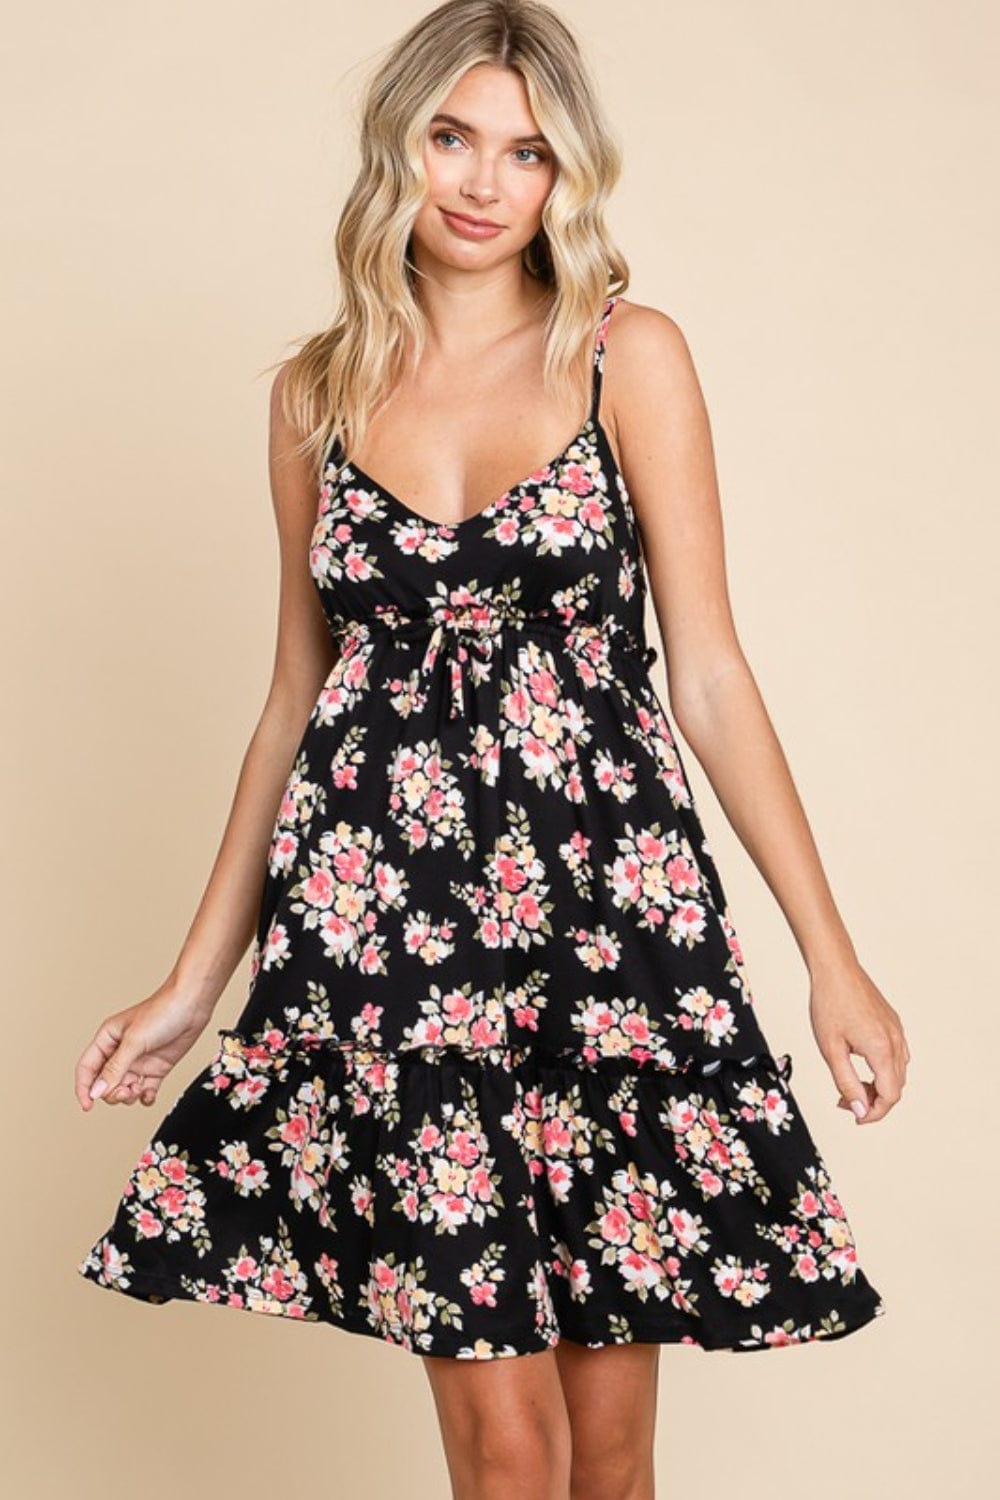 The802Gypsy Dresses Black / S ❤️GYPSY-Culture Code-Floral Frill Cami Dress